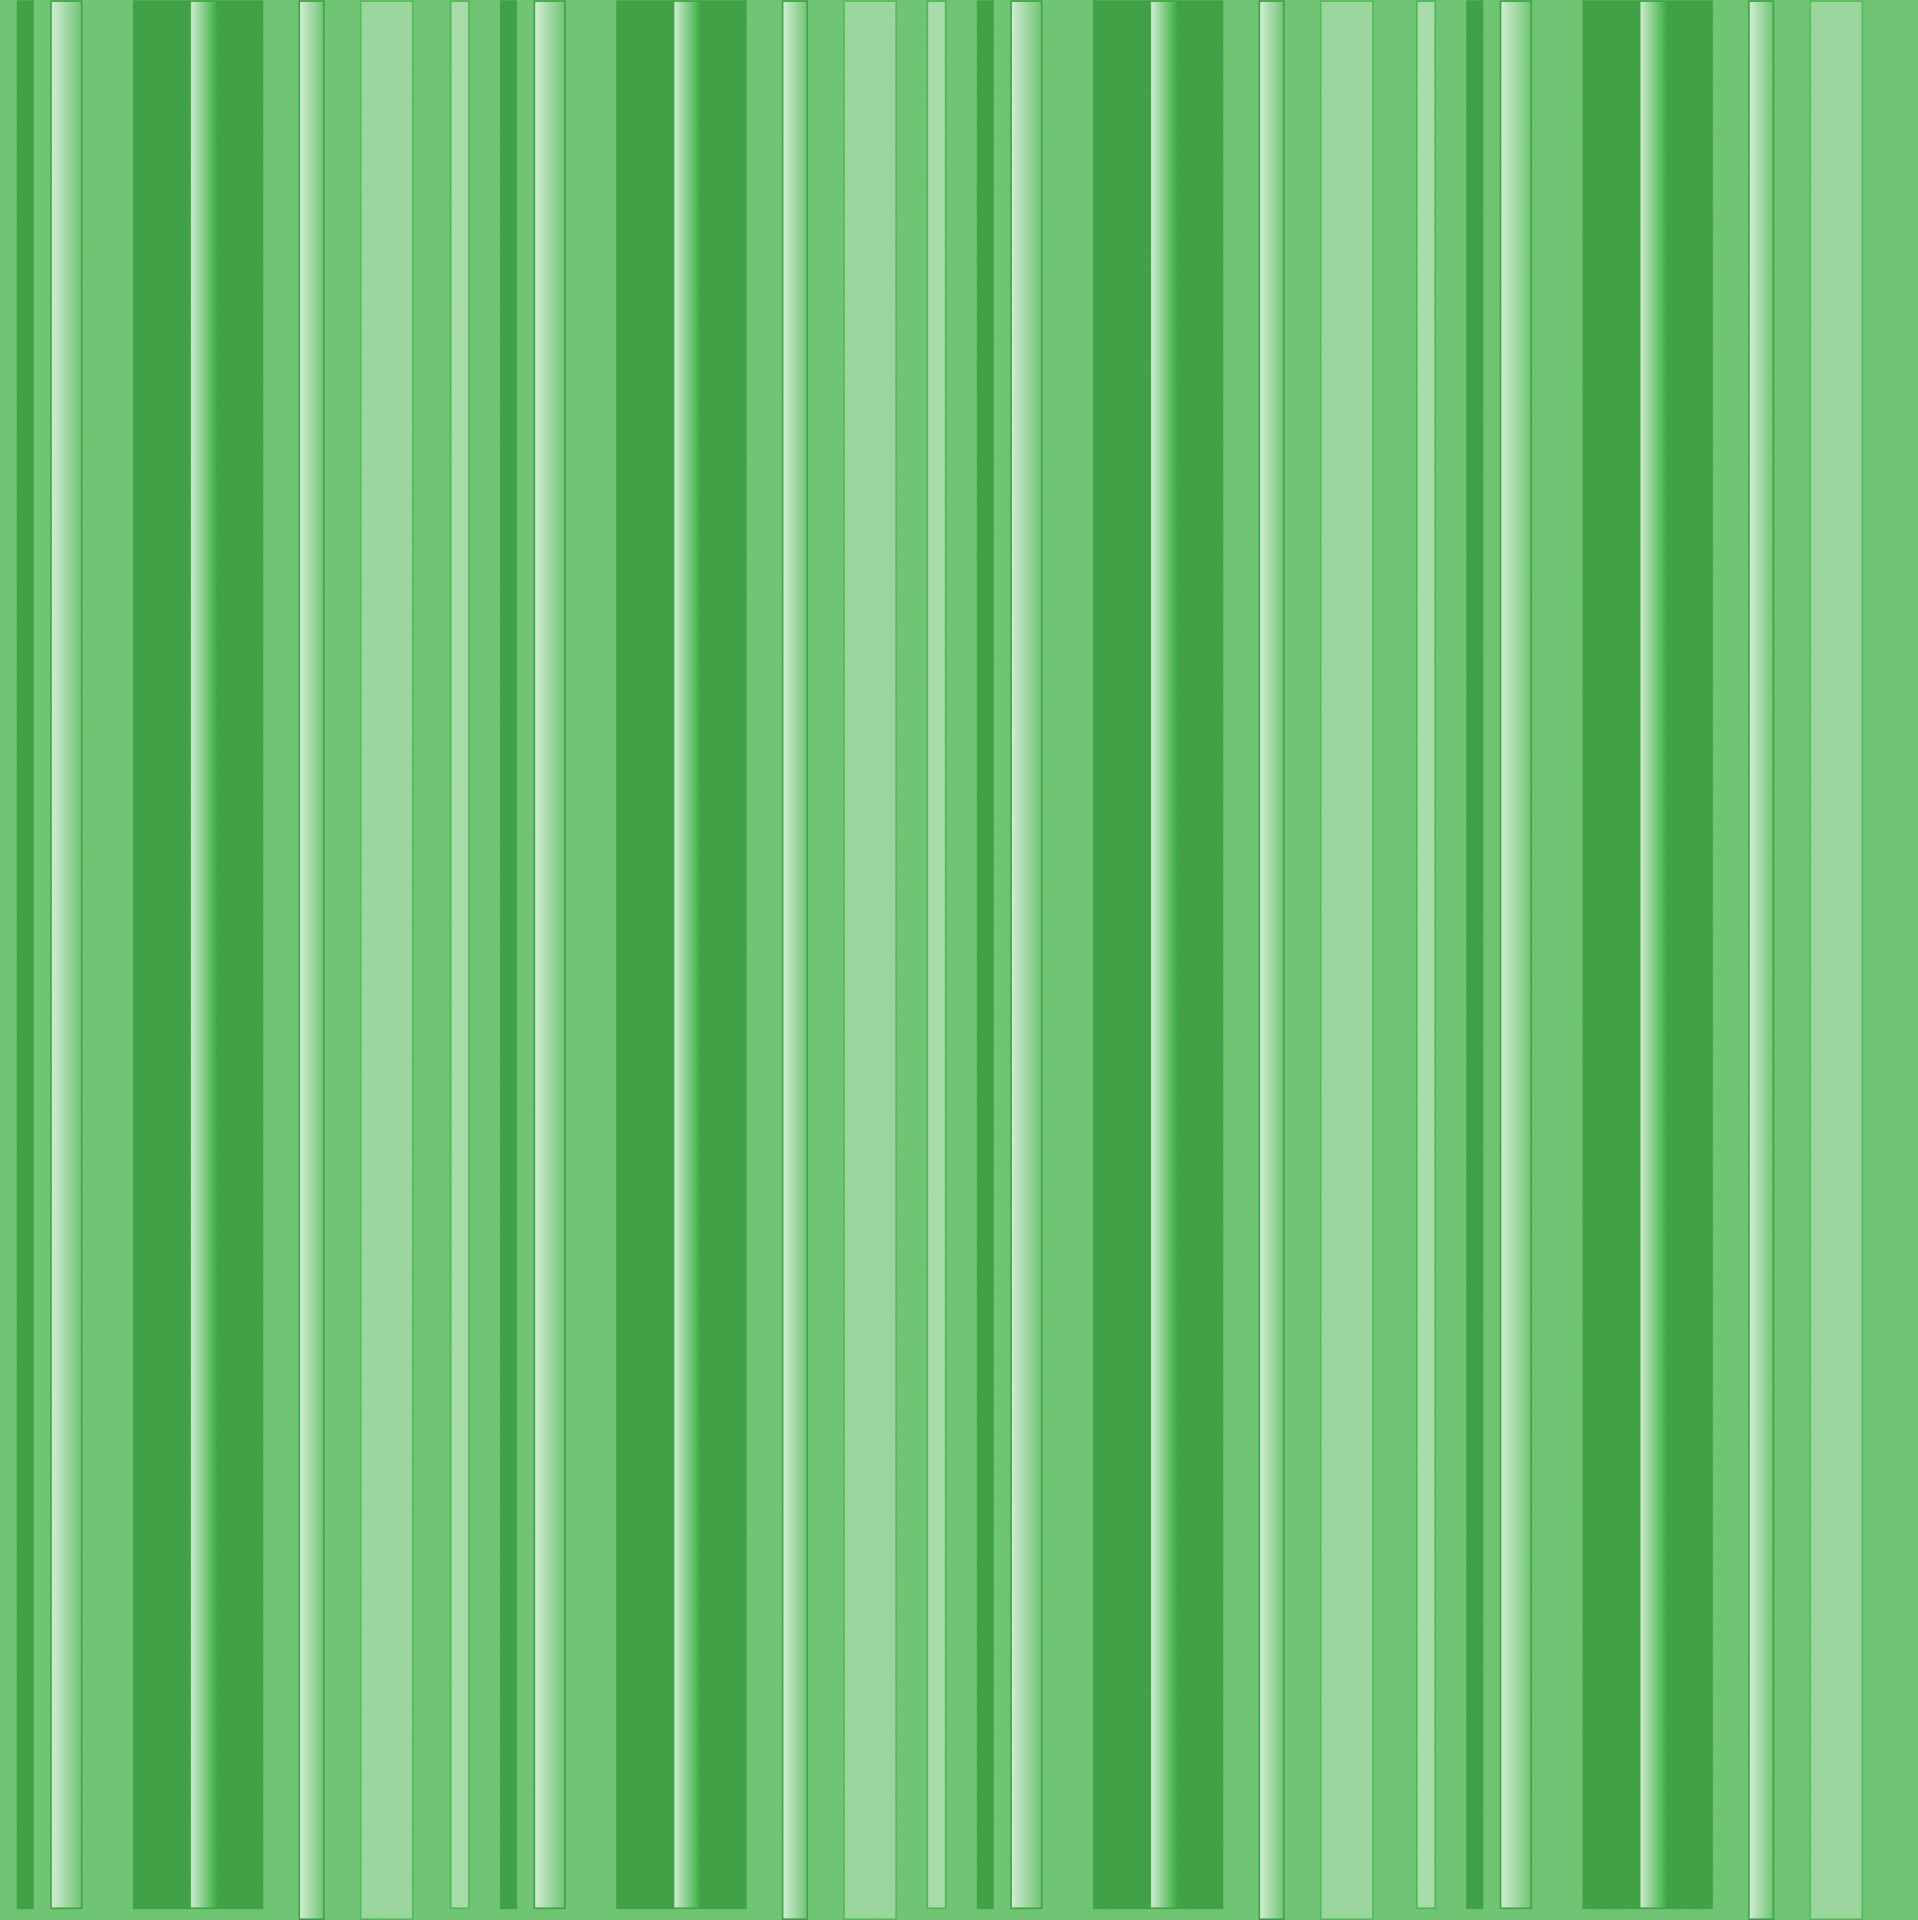 Download free photo of Stripes, striped, green, wallpaper, background